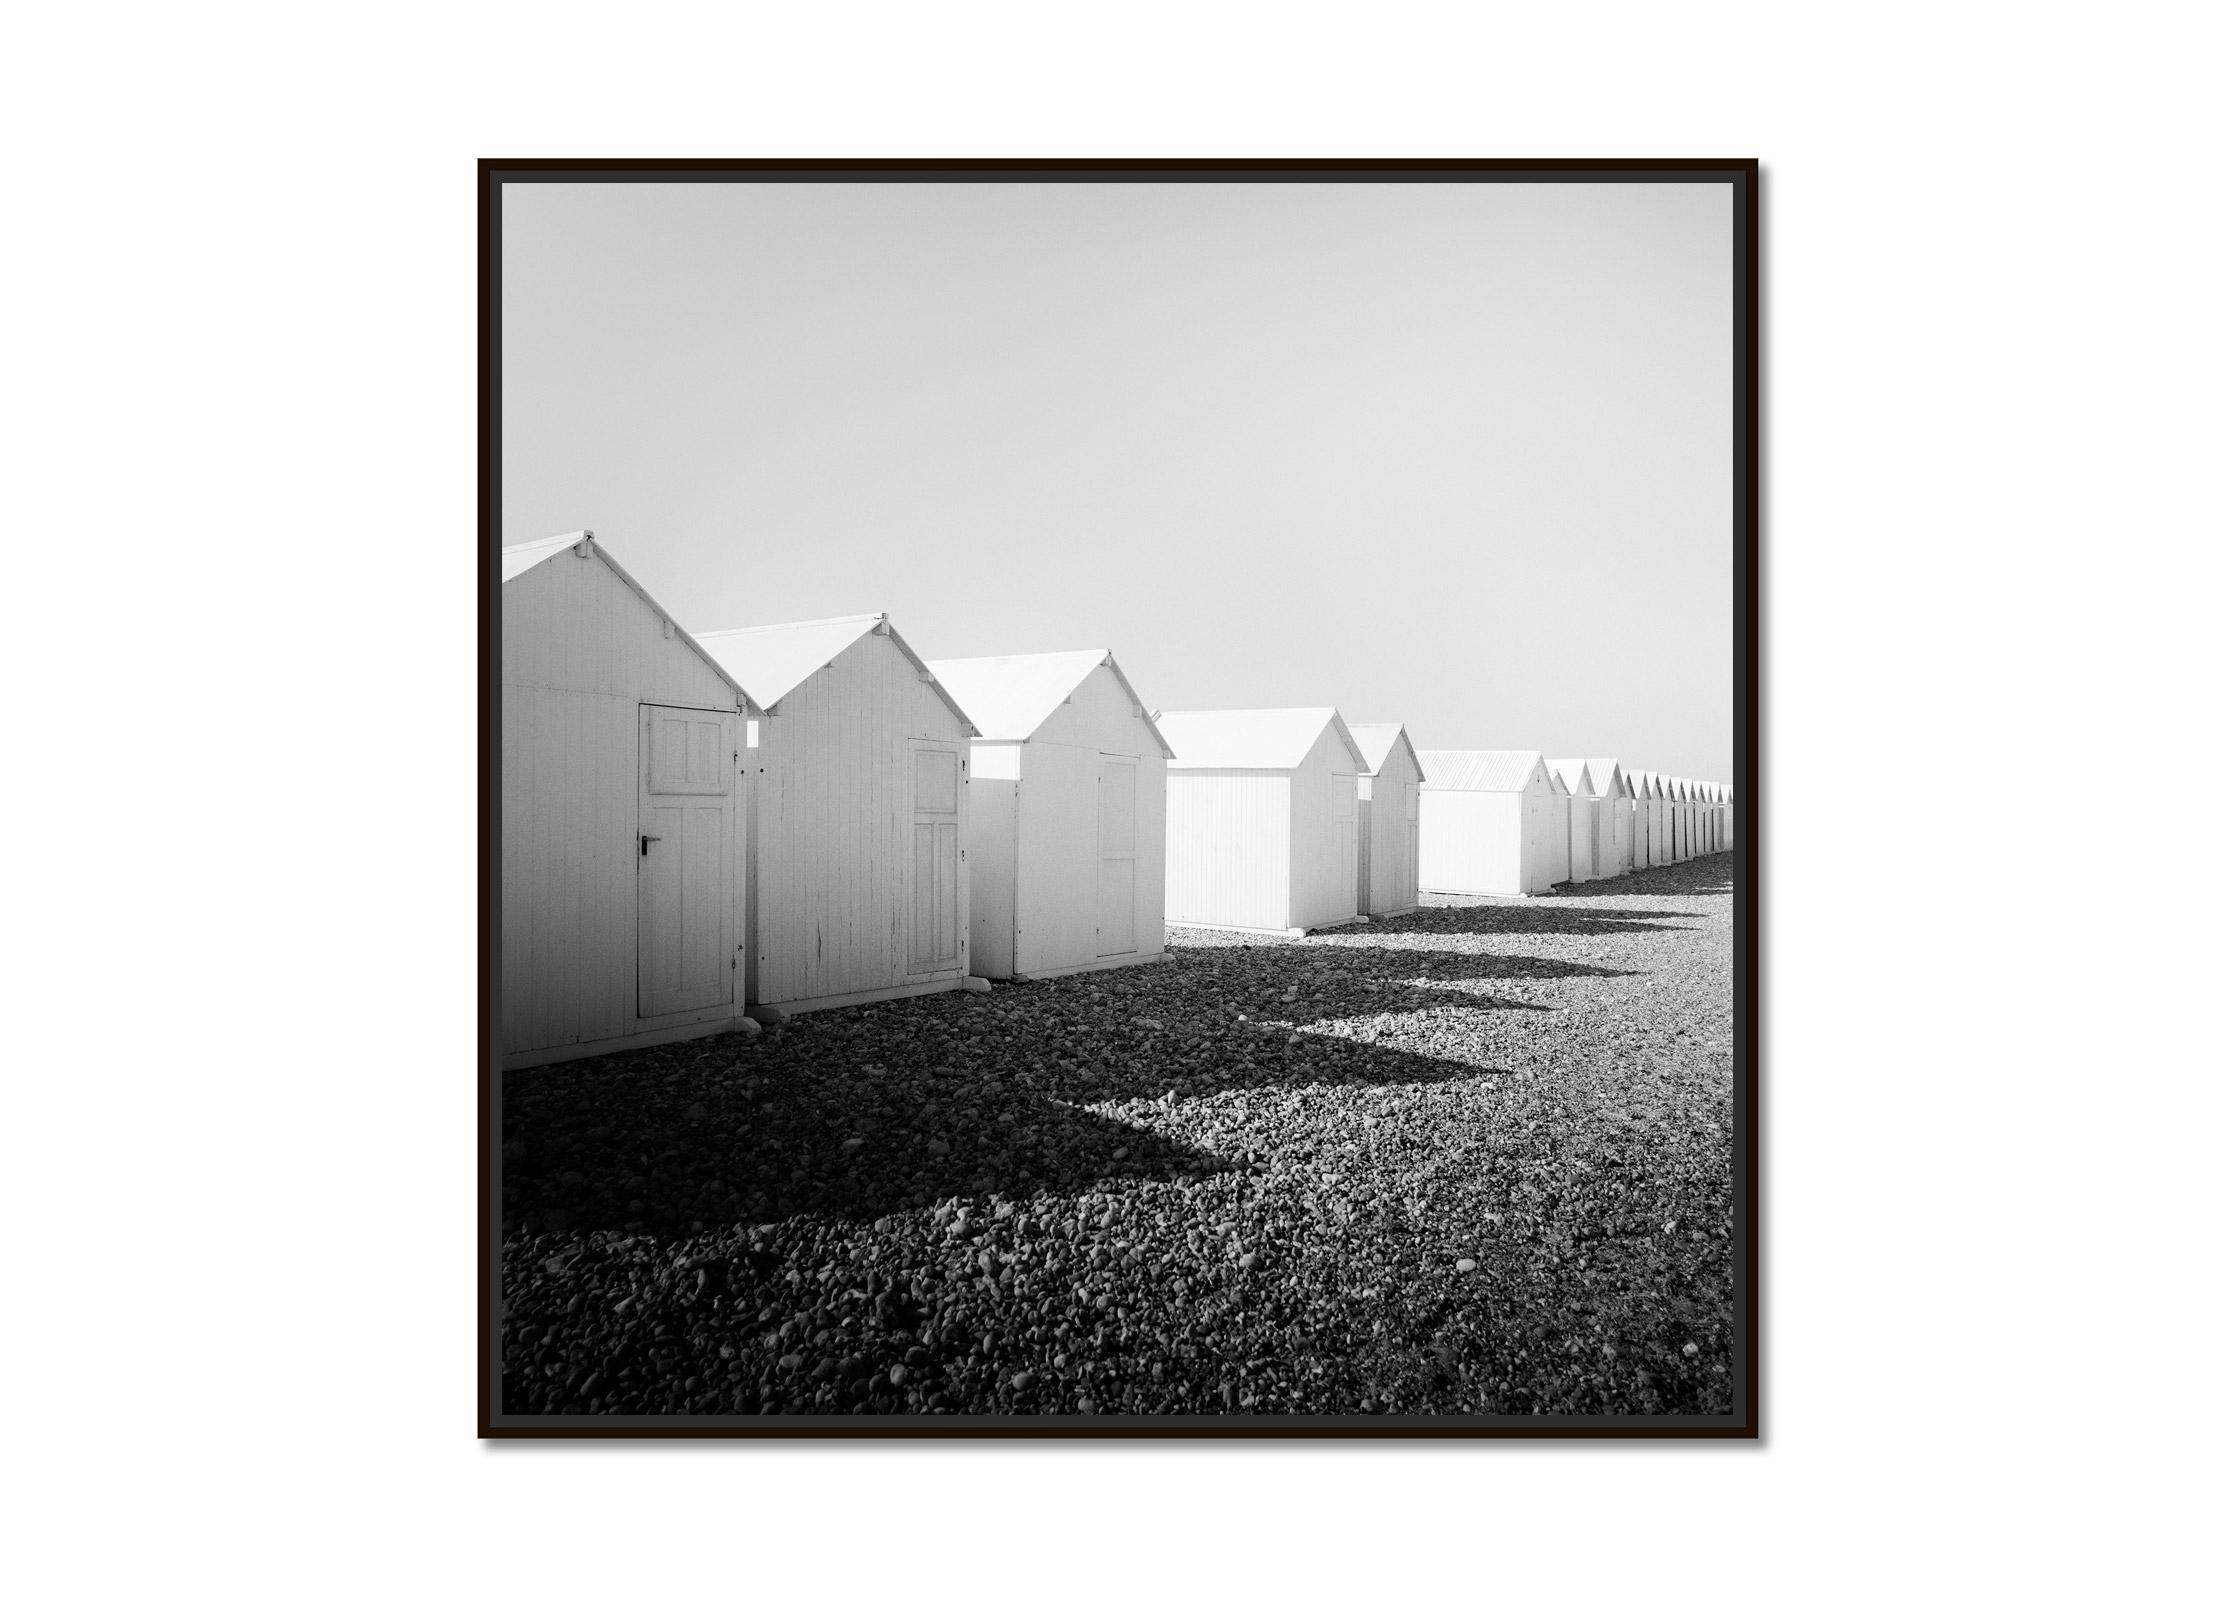 Row of Beach Huts, rocky beach, black and white, fine art, landscape photography - Photograph by Gerald Berghammer